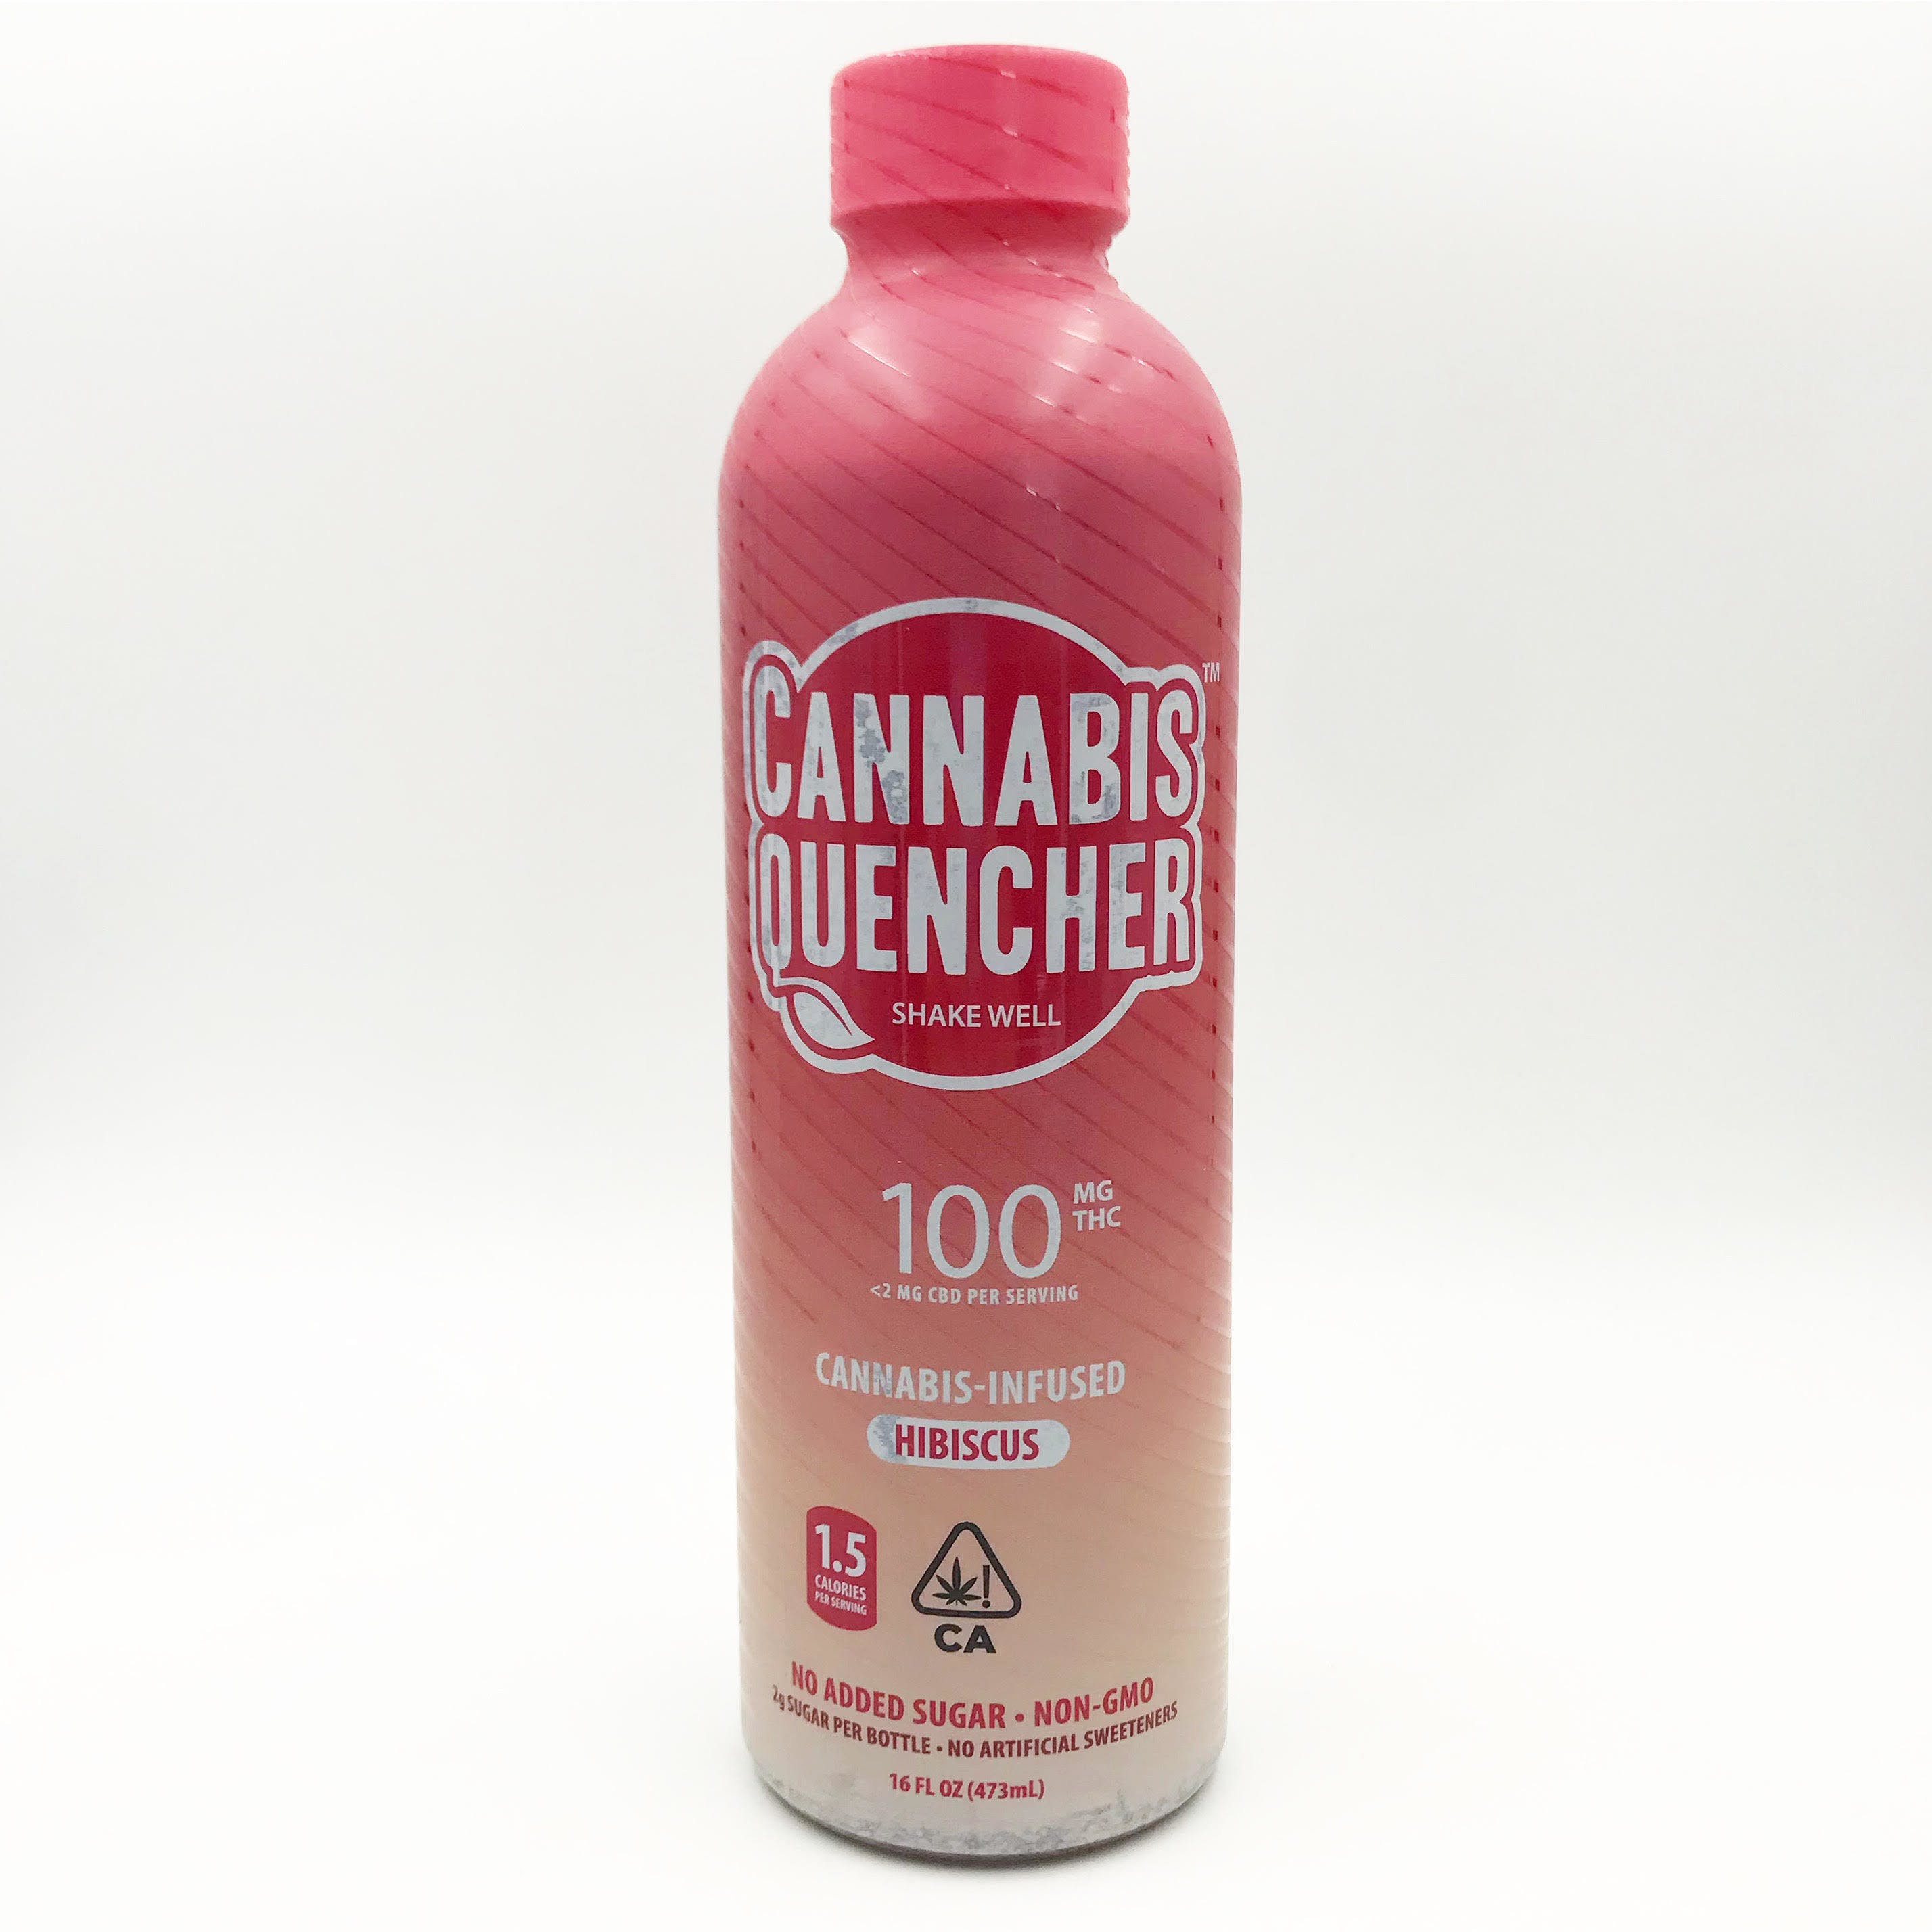 Venice Cookie Company - Hibiscus Cannabis Quencher 100mg